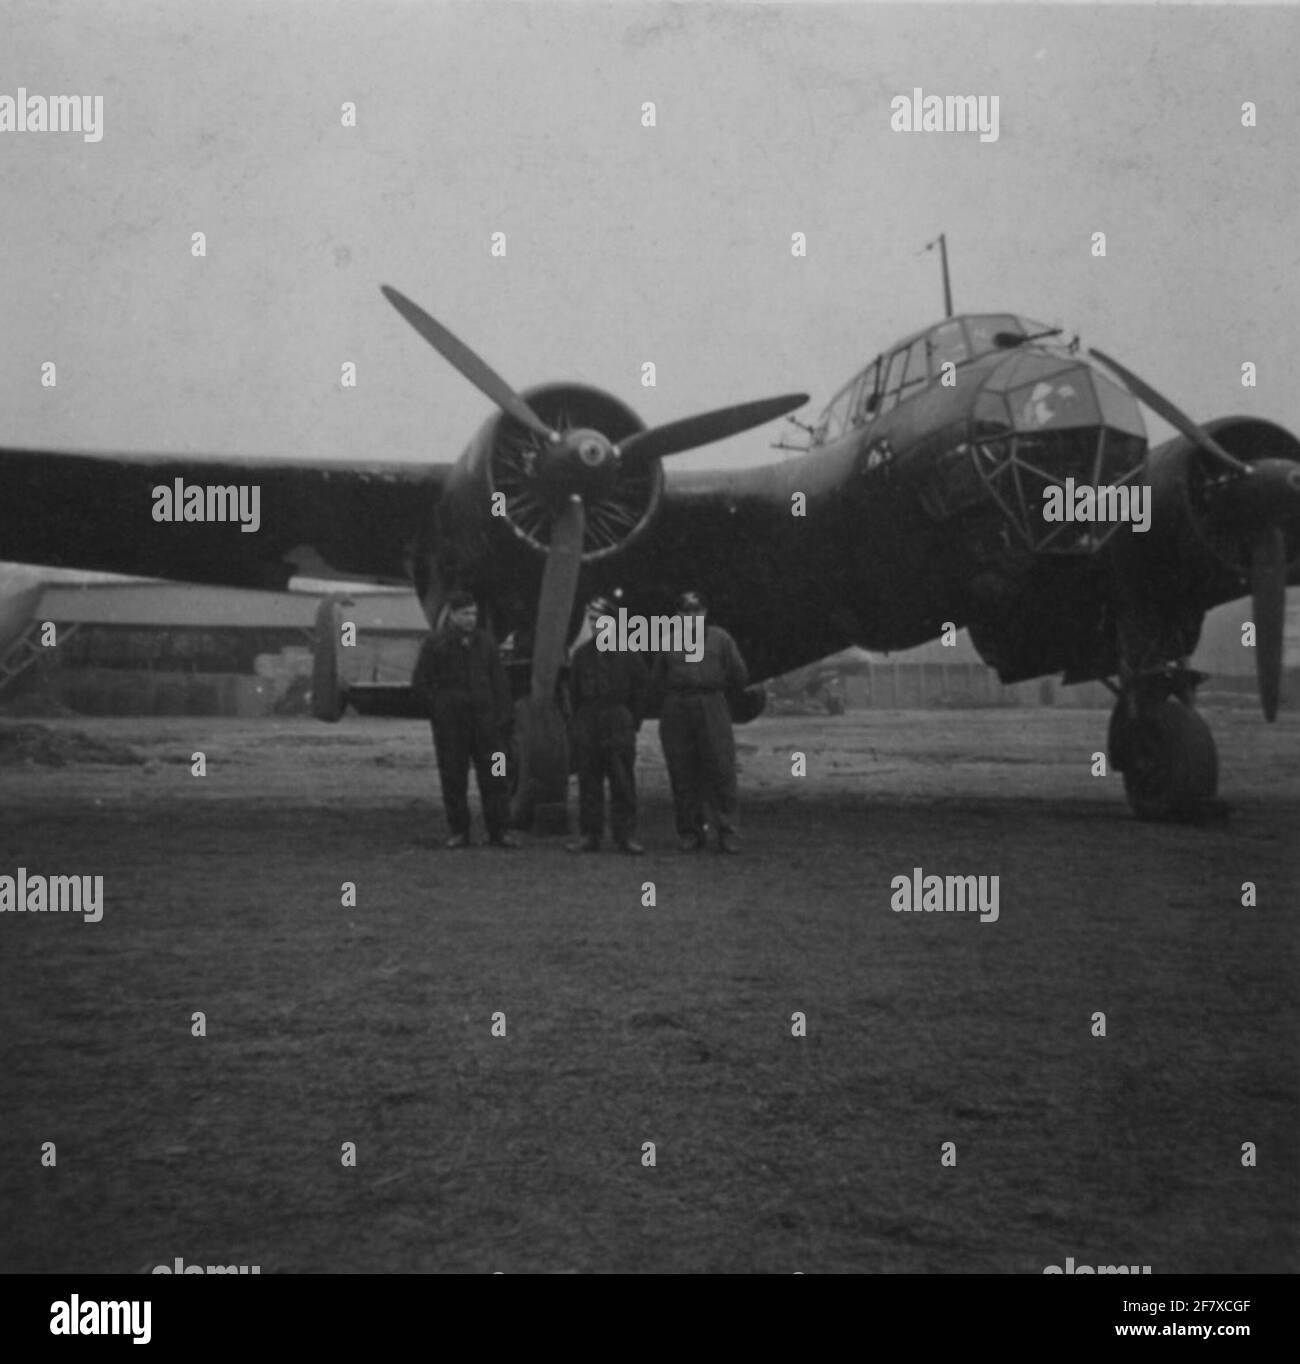 A Dornier DO 17 with Luftwaff Emiles in the foreground at Airport (Fliegerhorst) Schiphol. Stock Photo